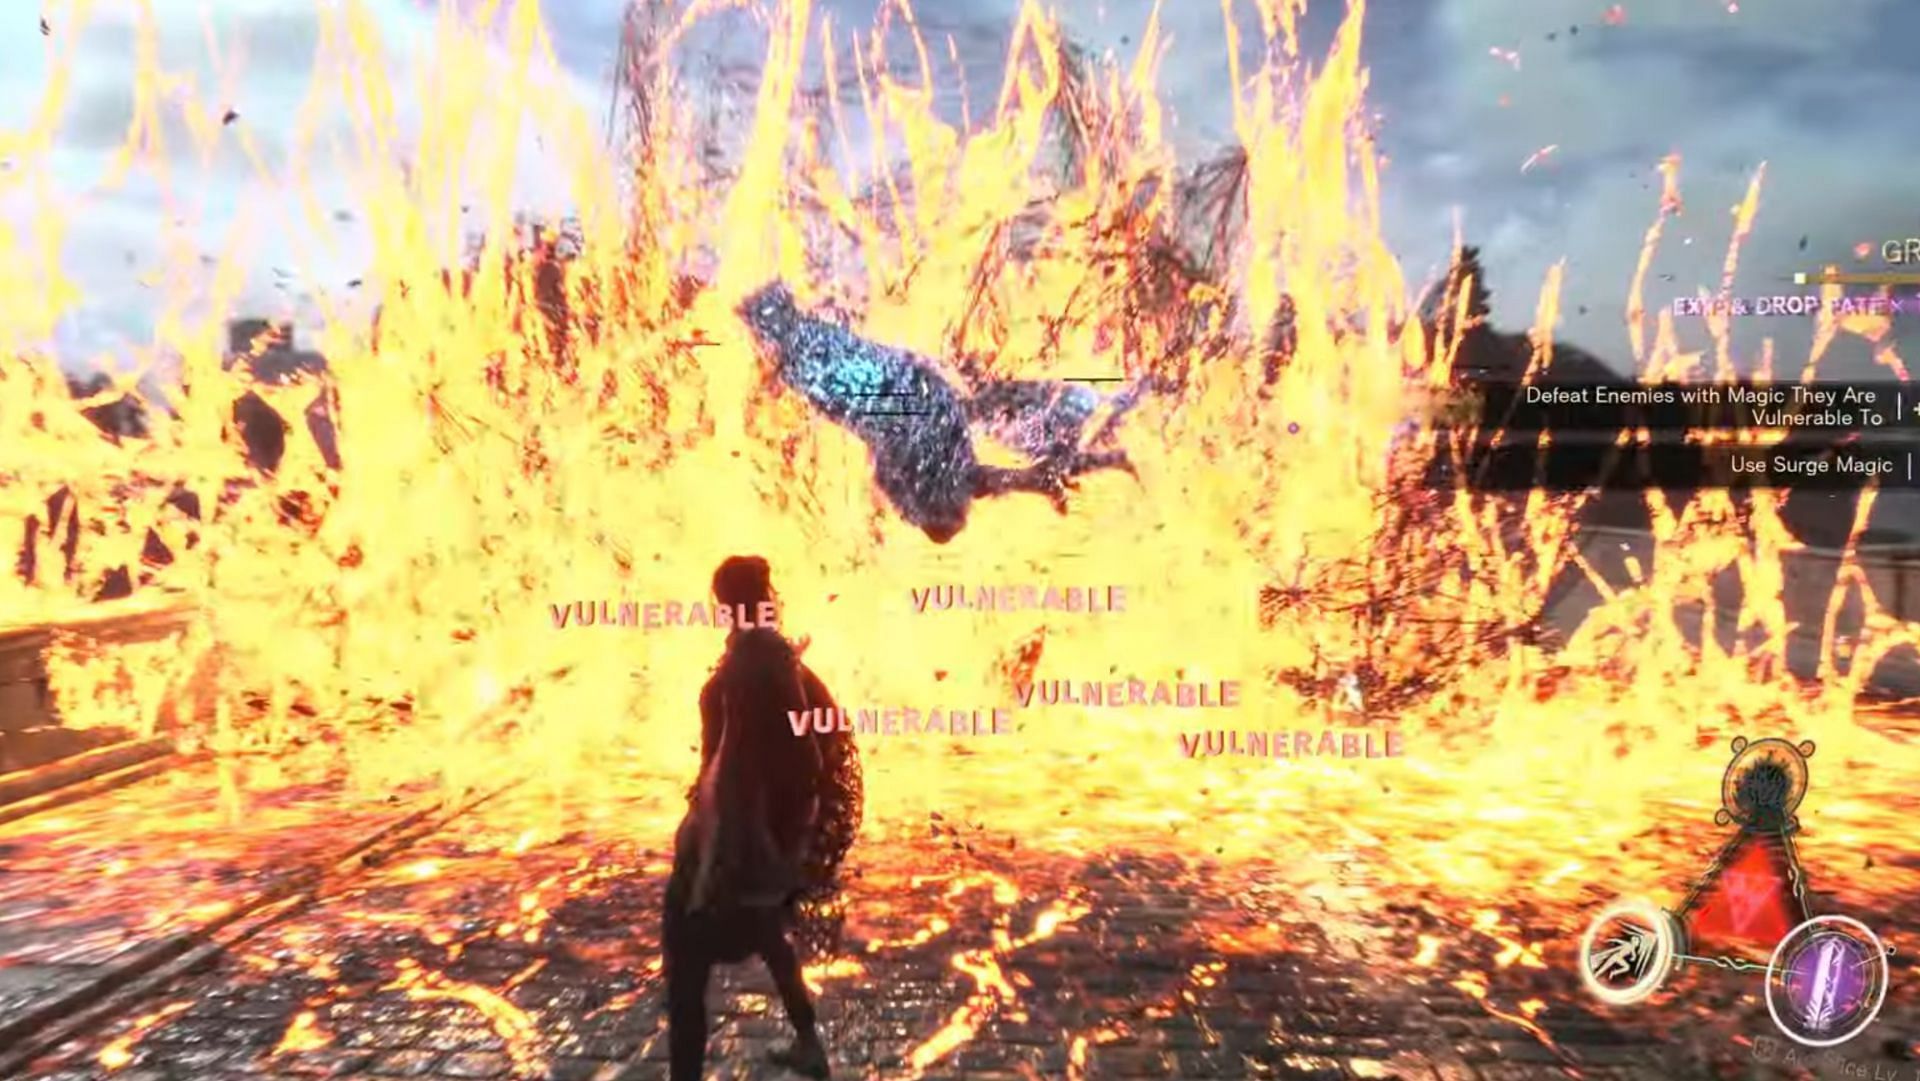 Conflagration in effect (Image via YouTube/AK STYLE GAMER)